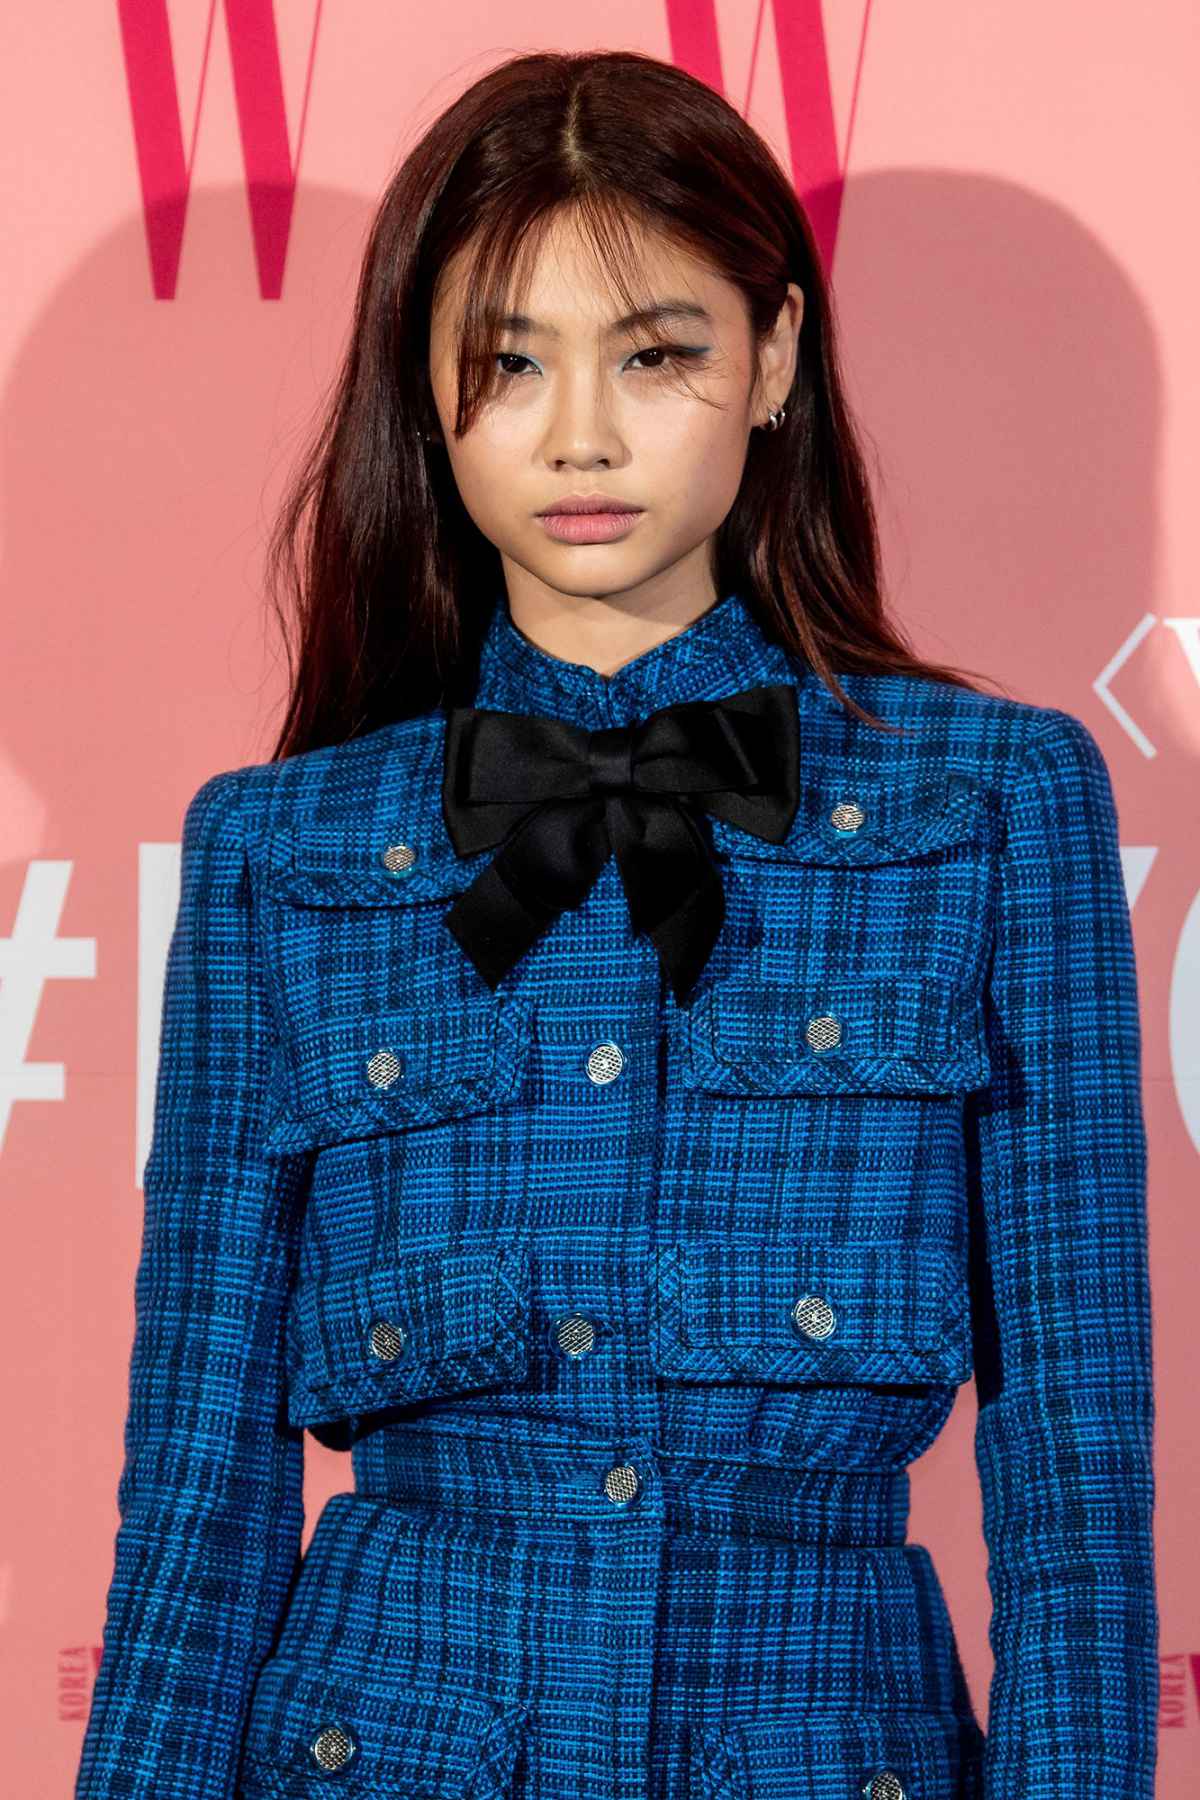 ⌘ on X: Hoyeon Jung's runway debut was at Louis Vuitton 2016 RTW and now  she is a Global Ambassador!  / X